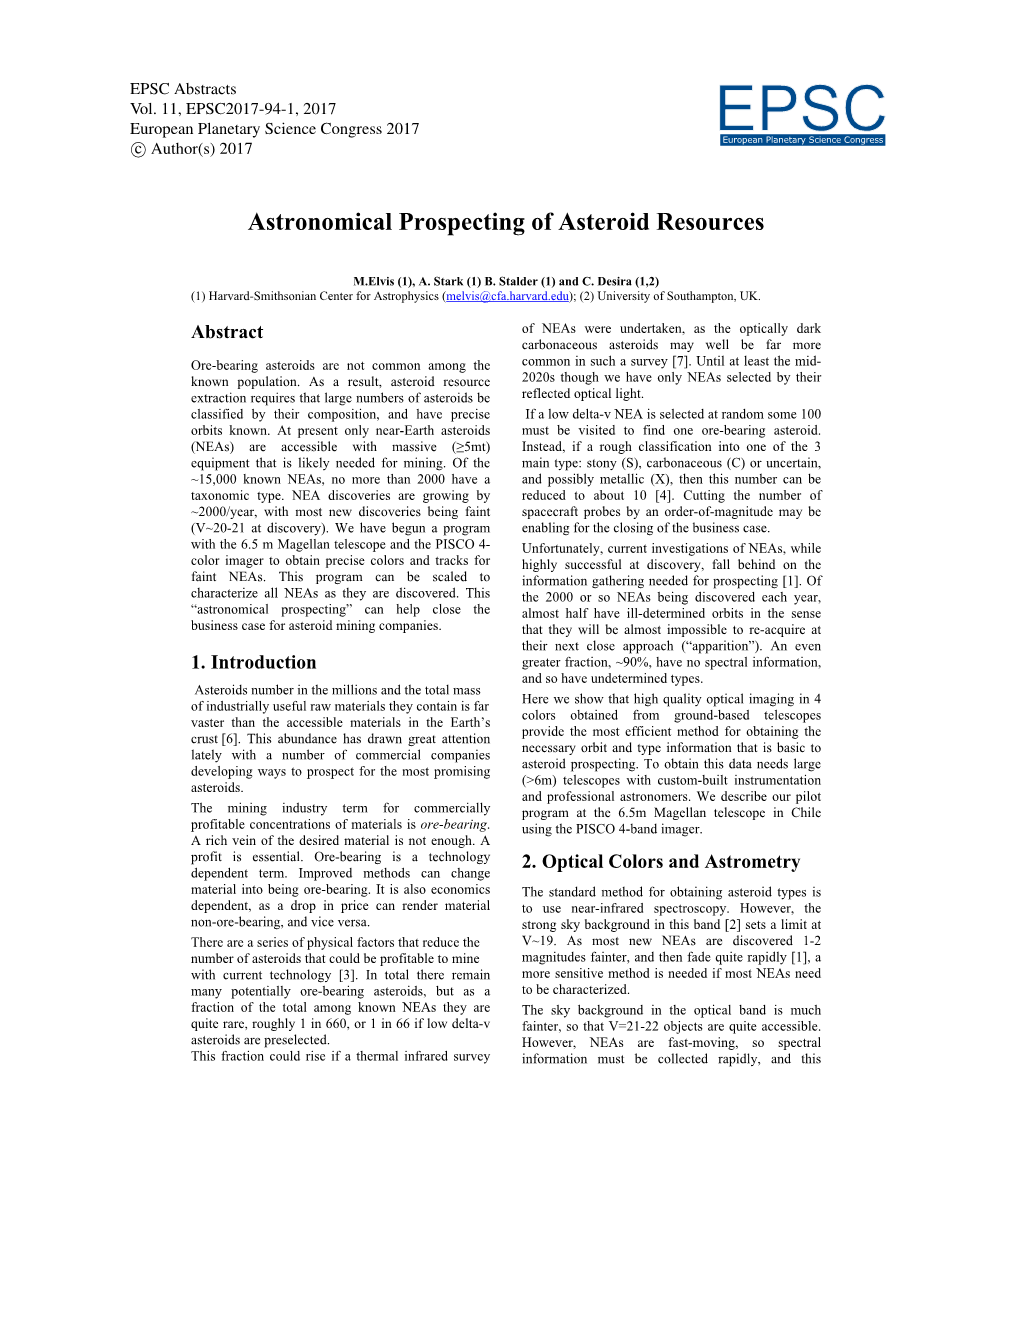 Astronomical Prospecting of Asteroid Resources